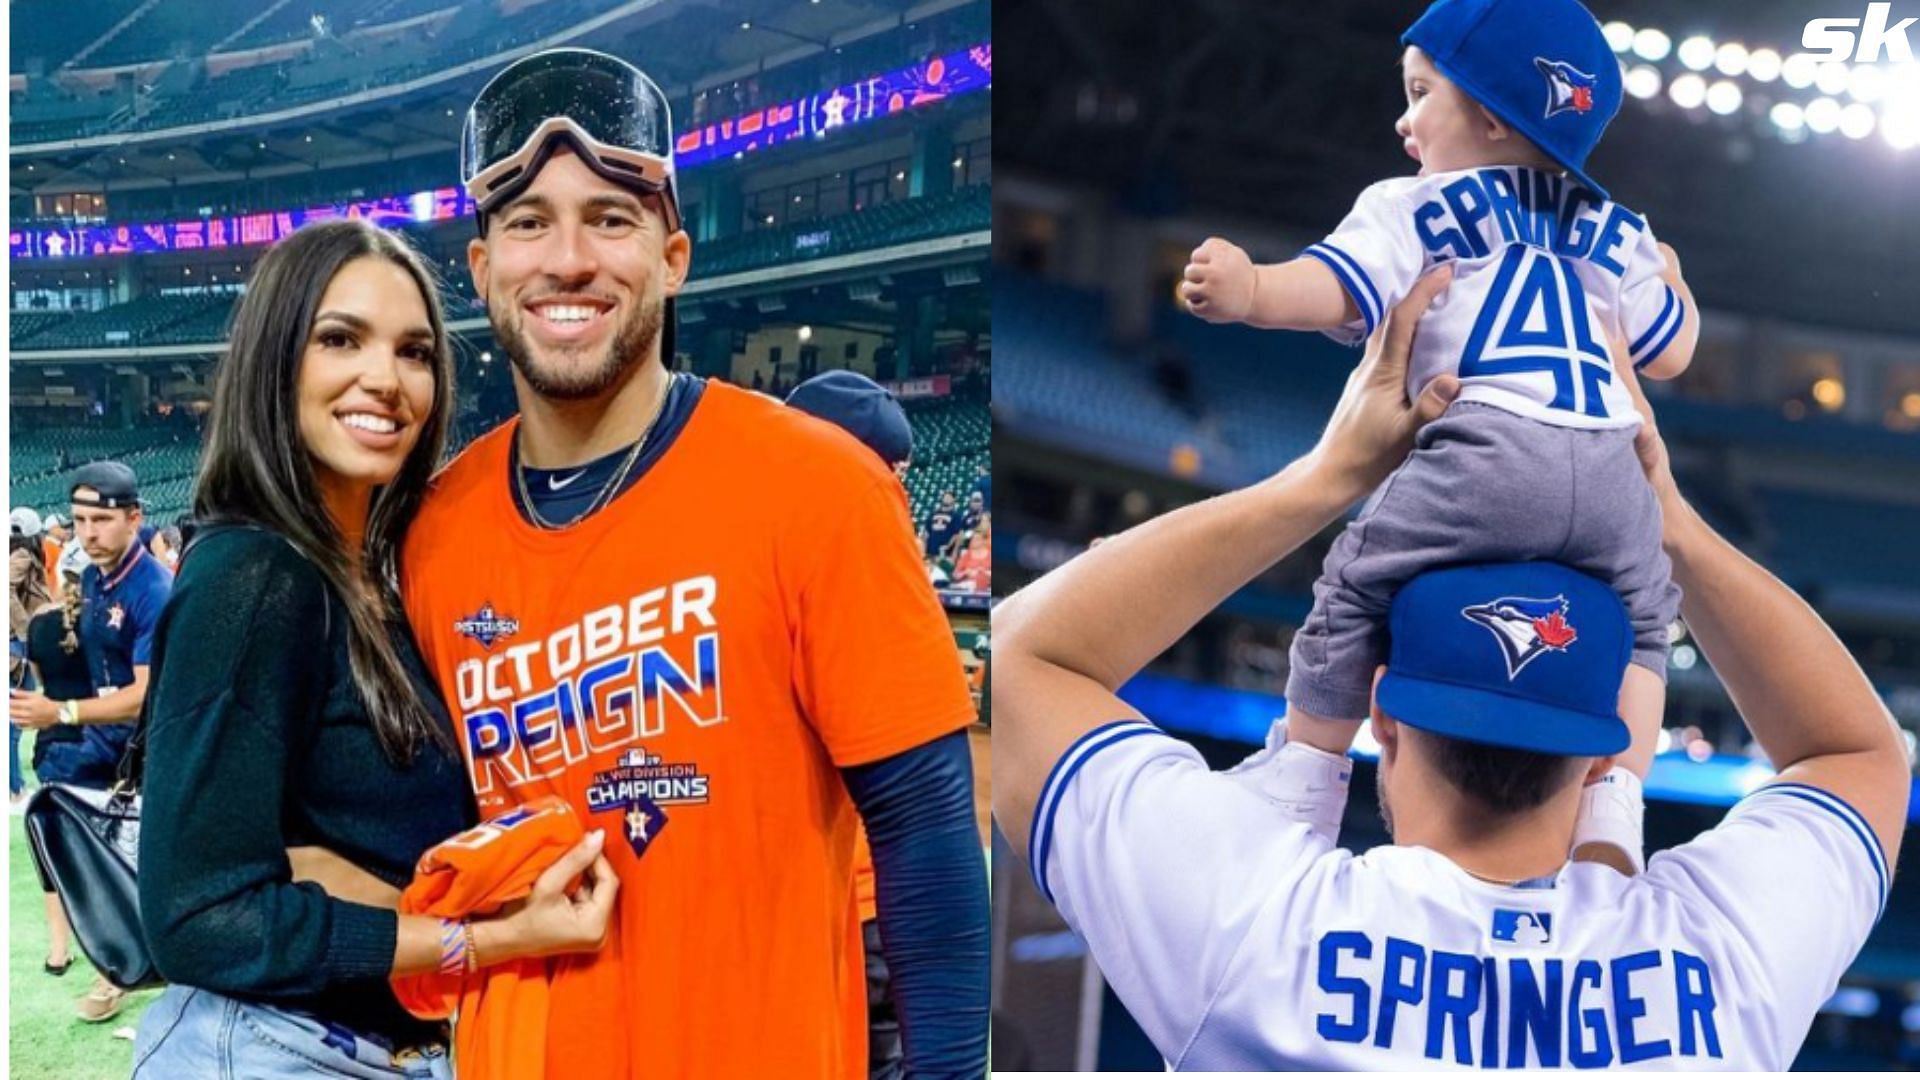 Charlise Castro & Her Spouse George Springer Blessed With A Baby